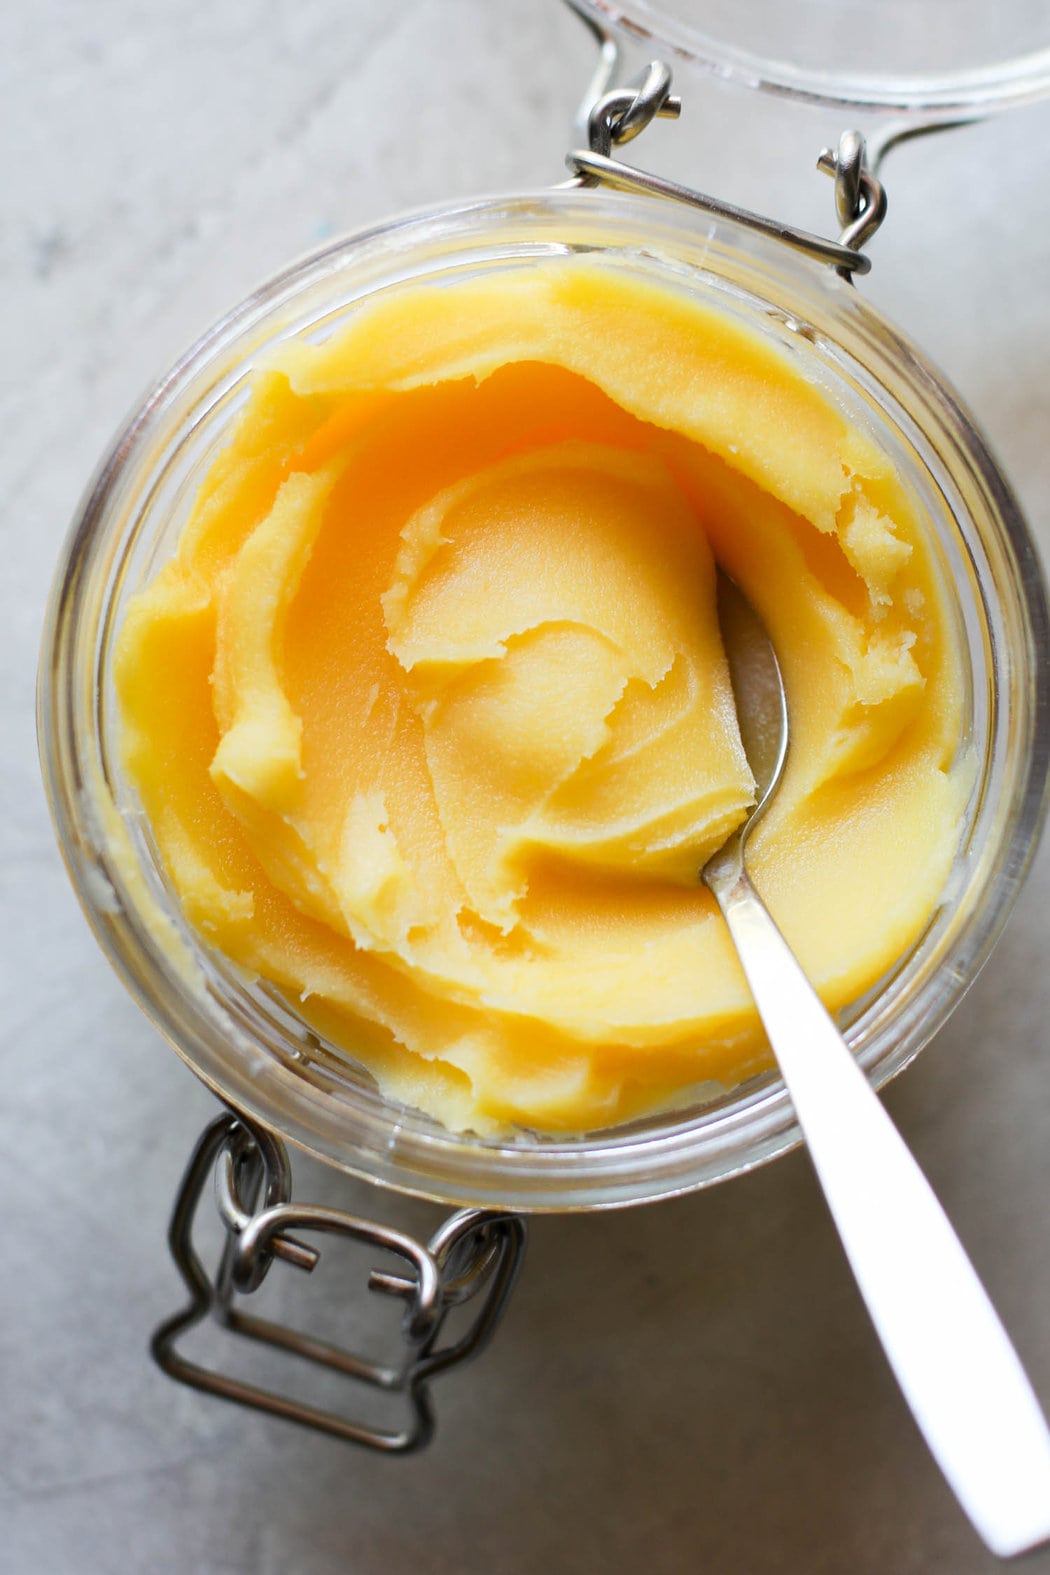 What is Ghee - The Real Food Dietitians